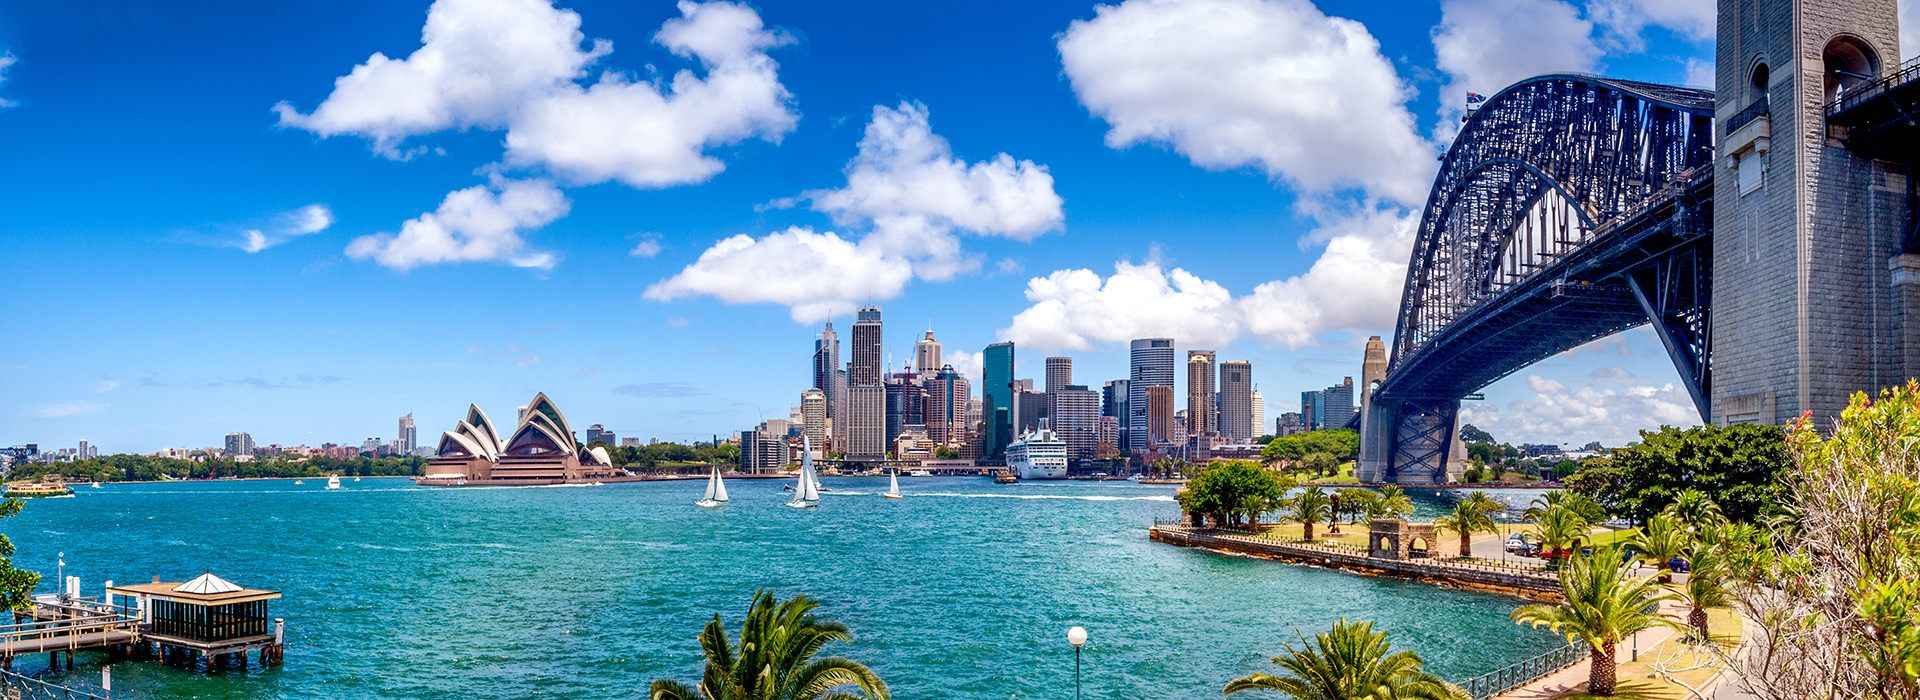 Australia Travel Guide - Travel Insights and Tips